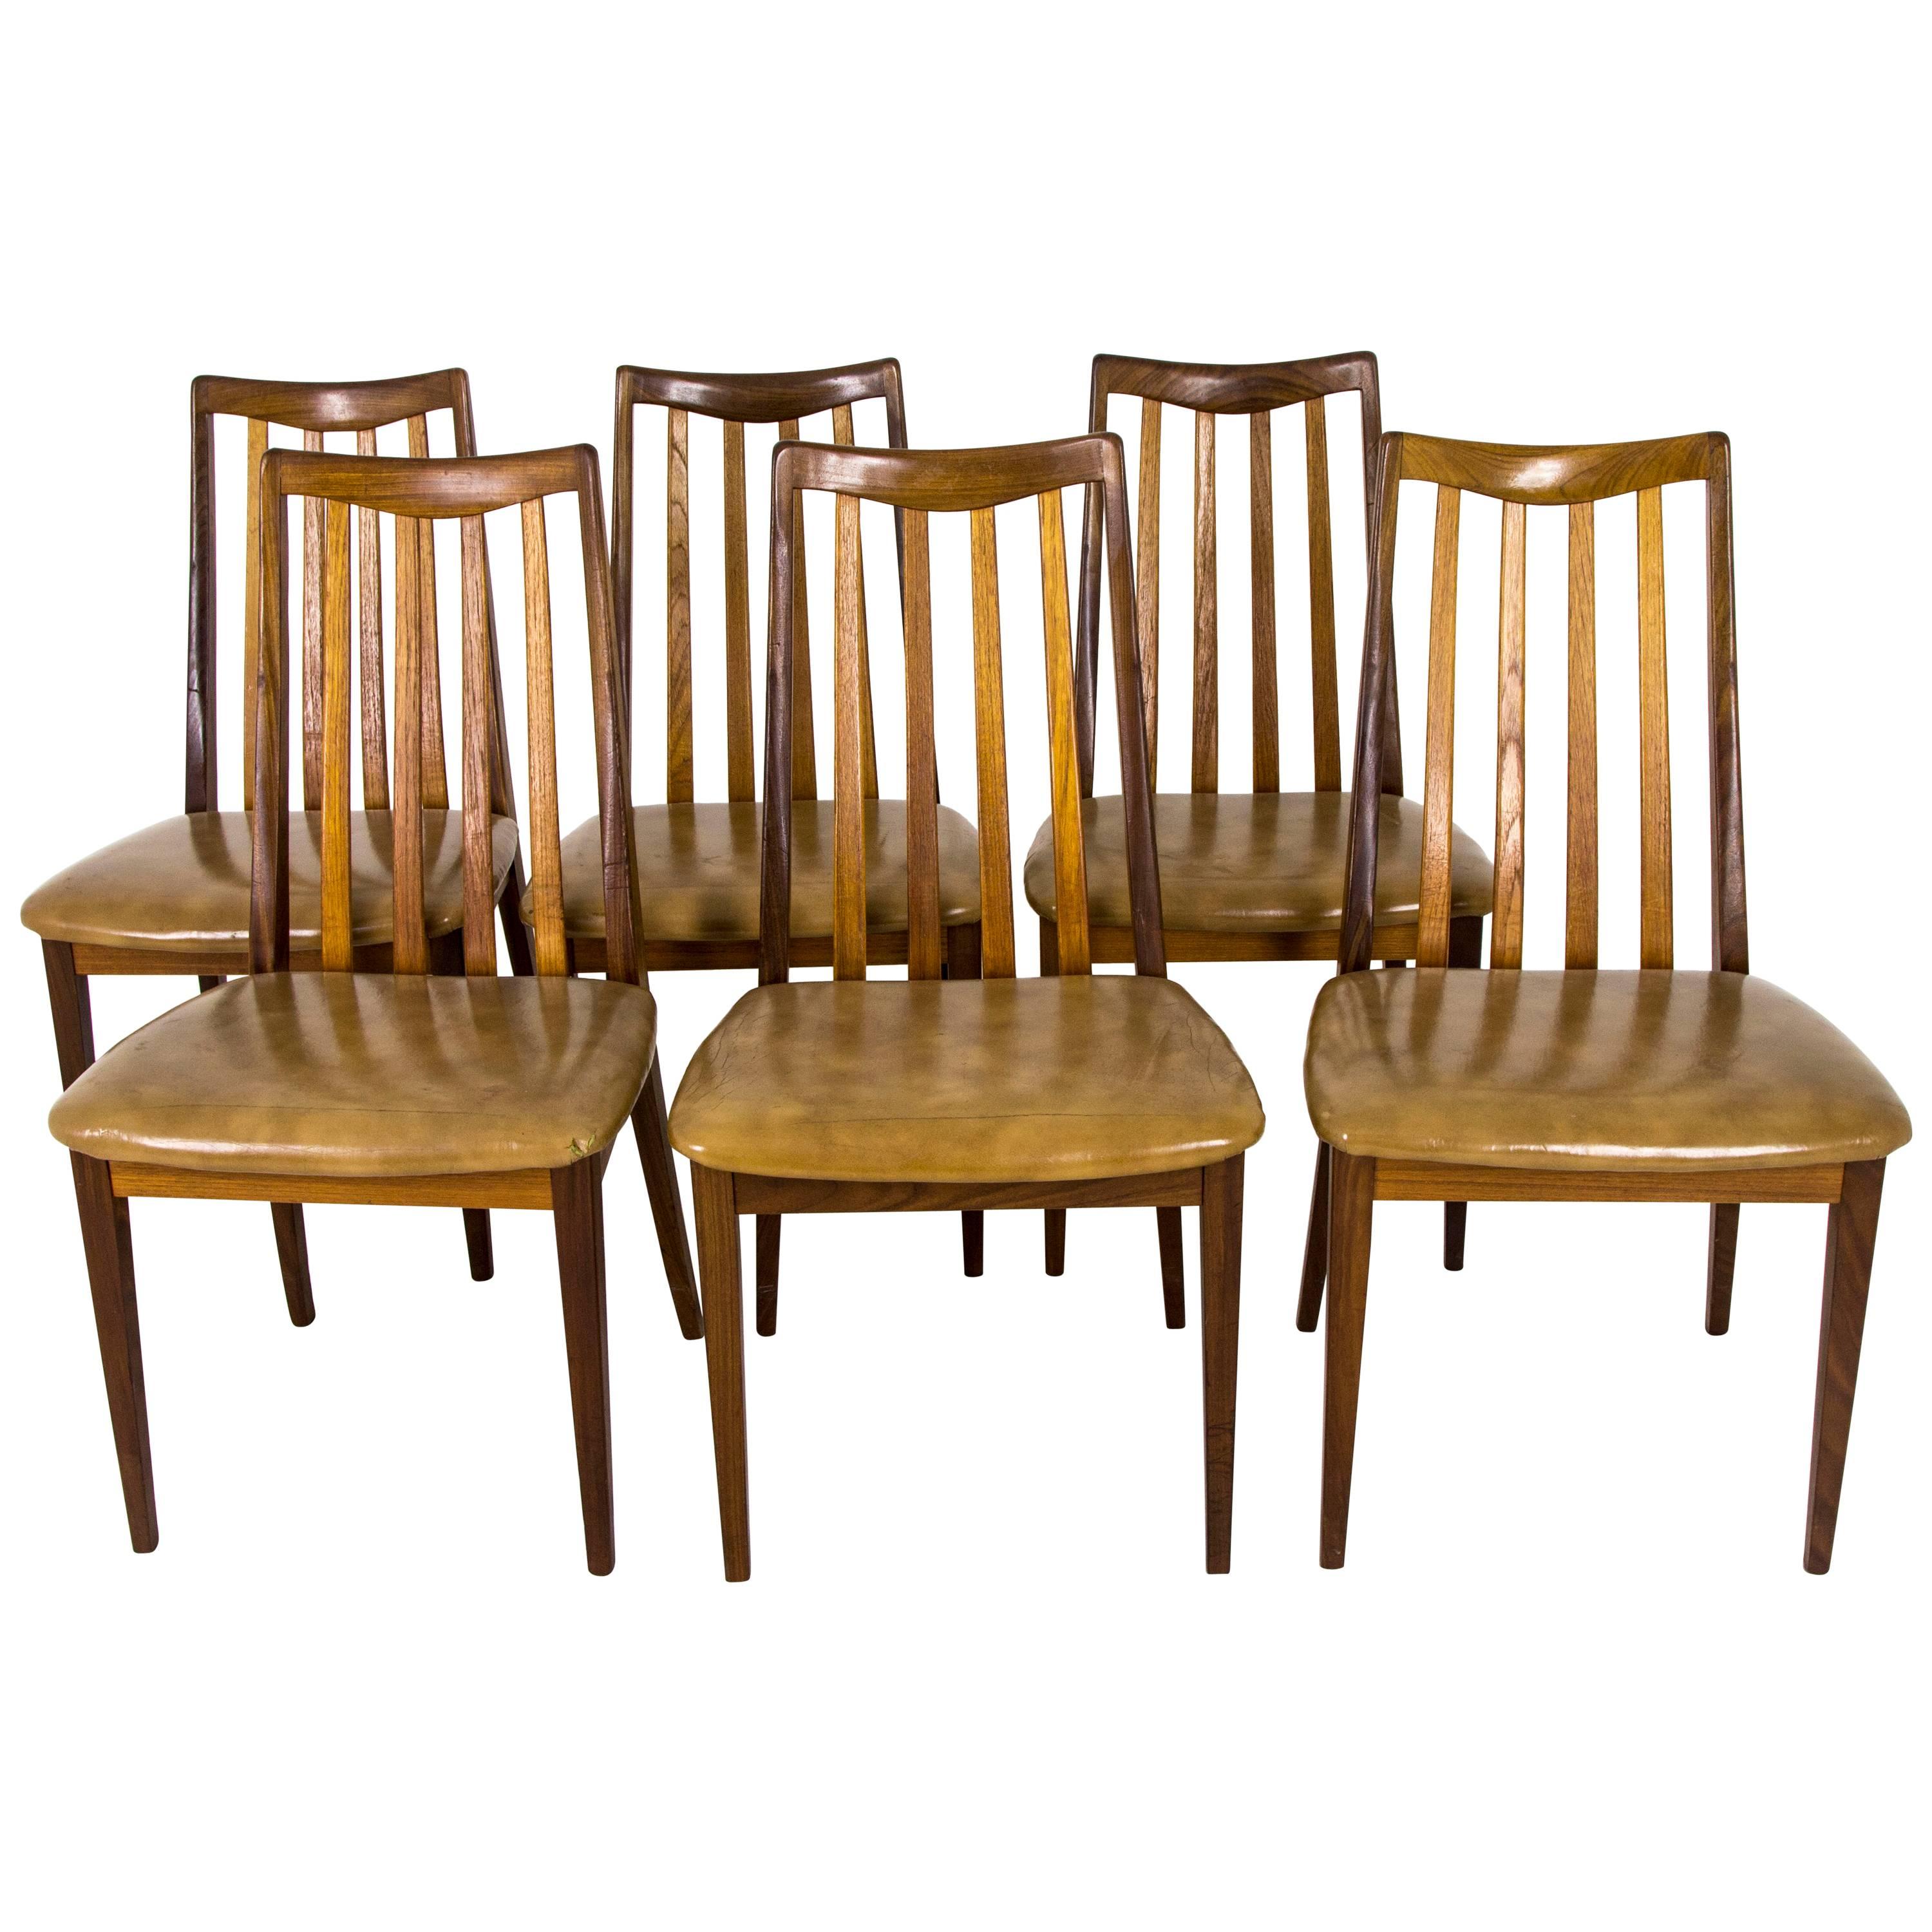 Vintage Mid-Century Modern Six Teak and Afromosia Dining Chairs by LG Dandy